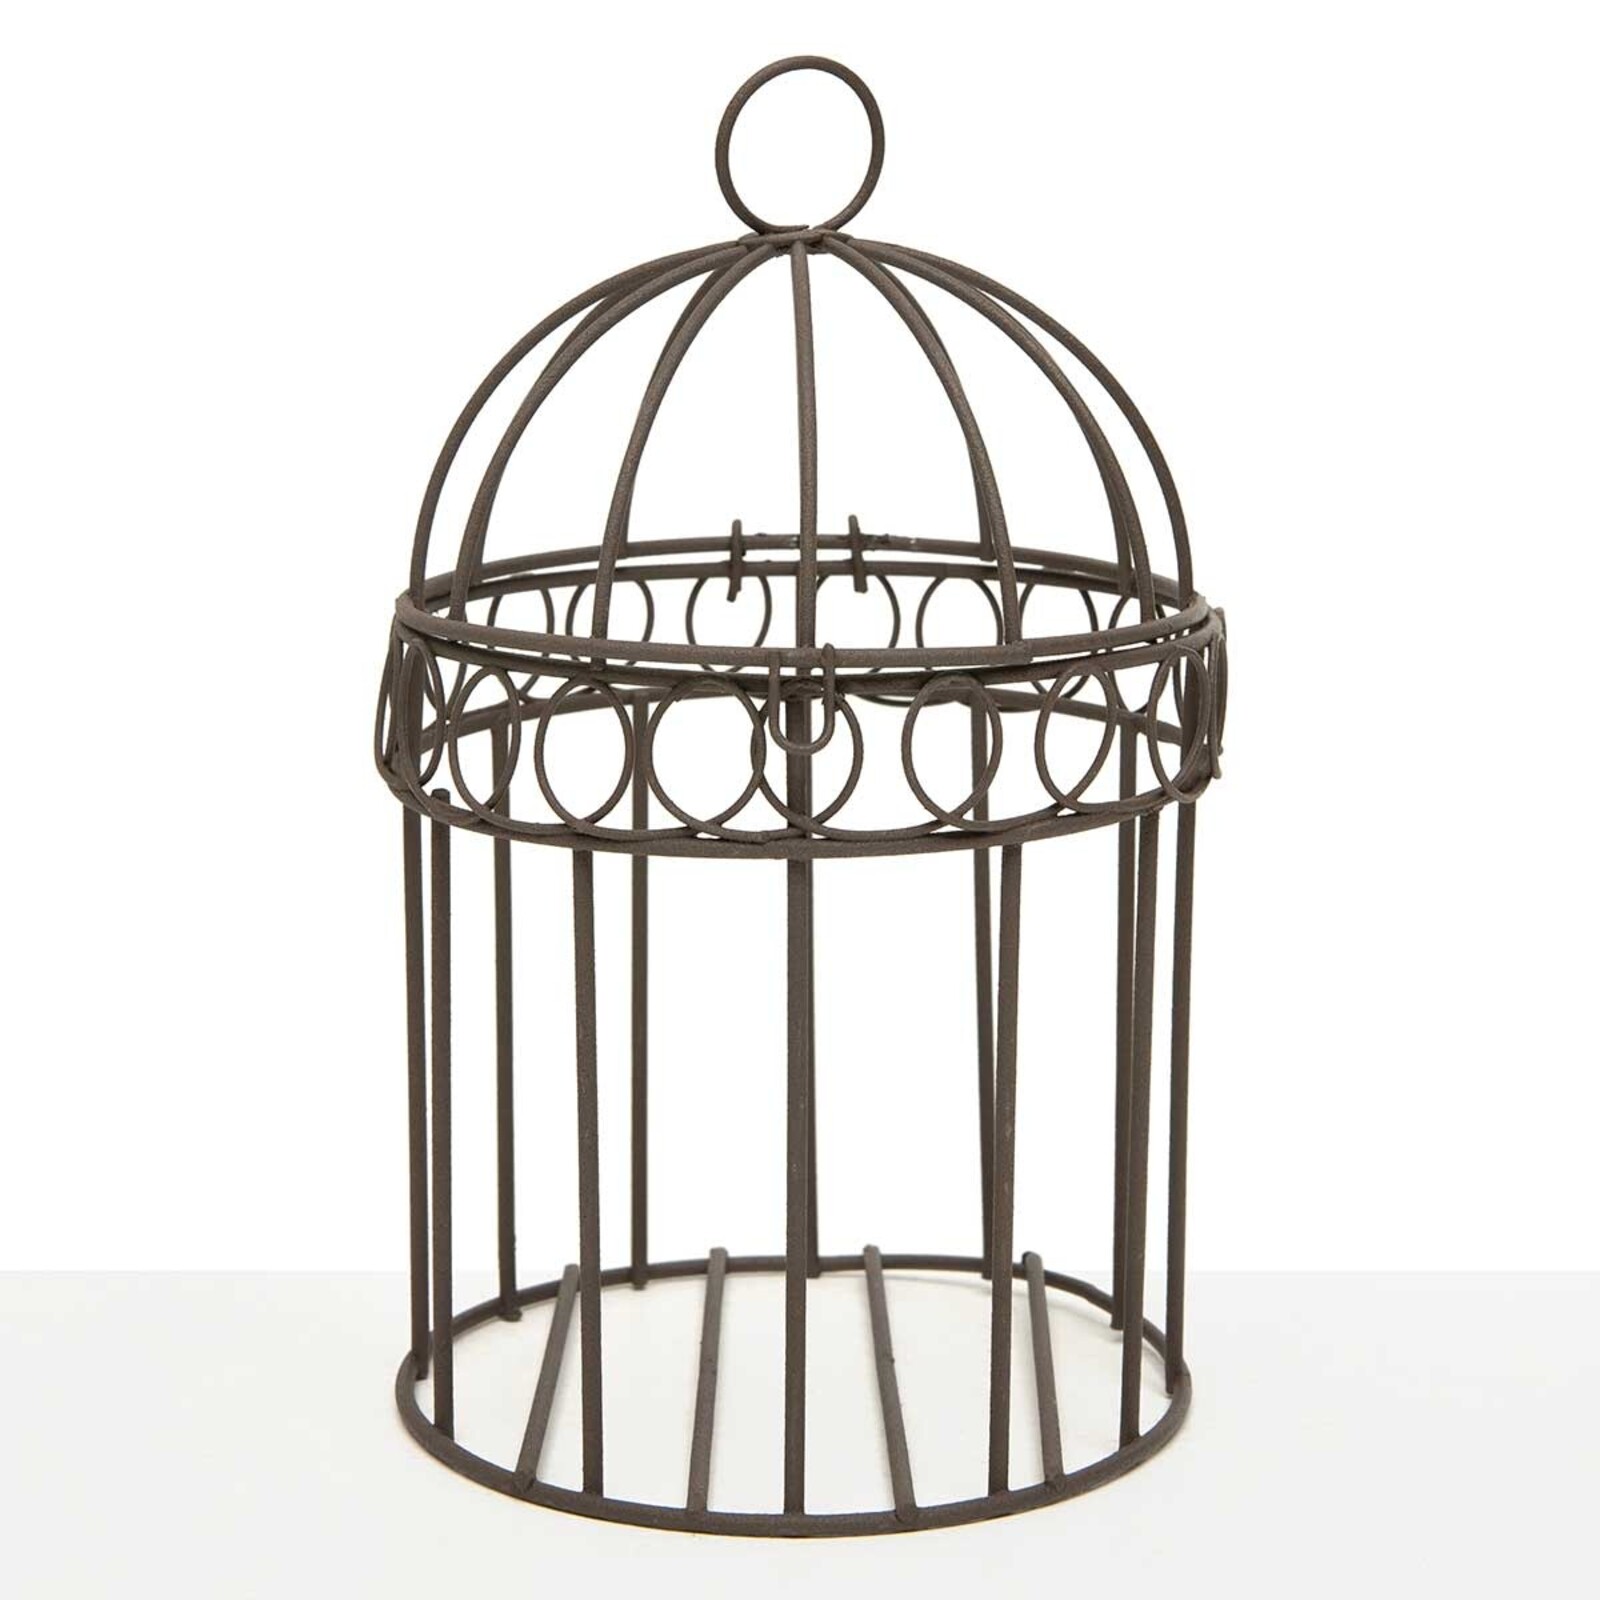 Meravic BIRD CAGE  BROWN METAL WITH TOP OPENING  A3671 loading=